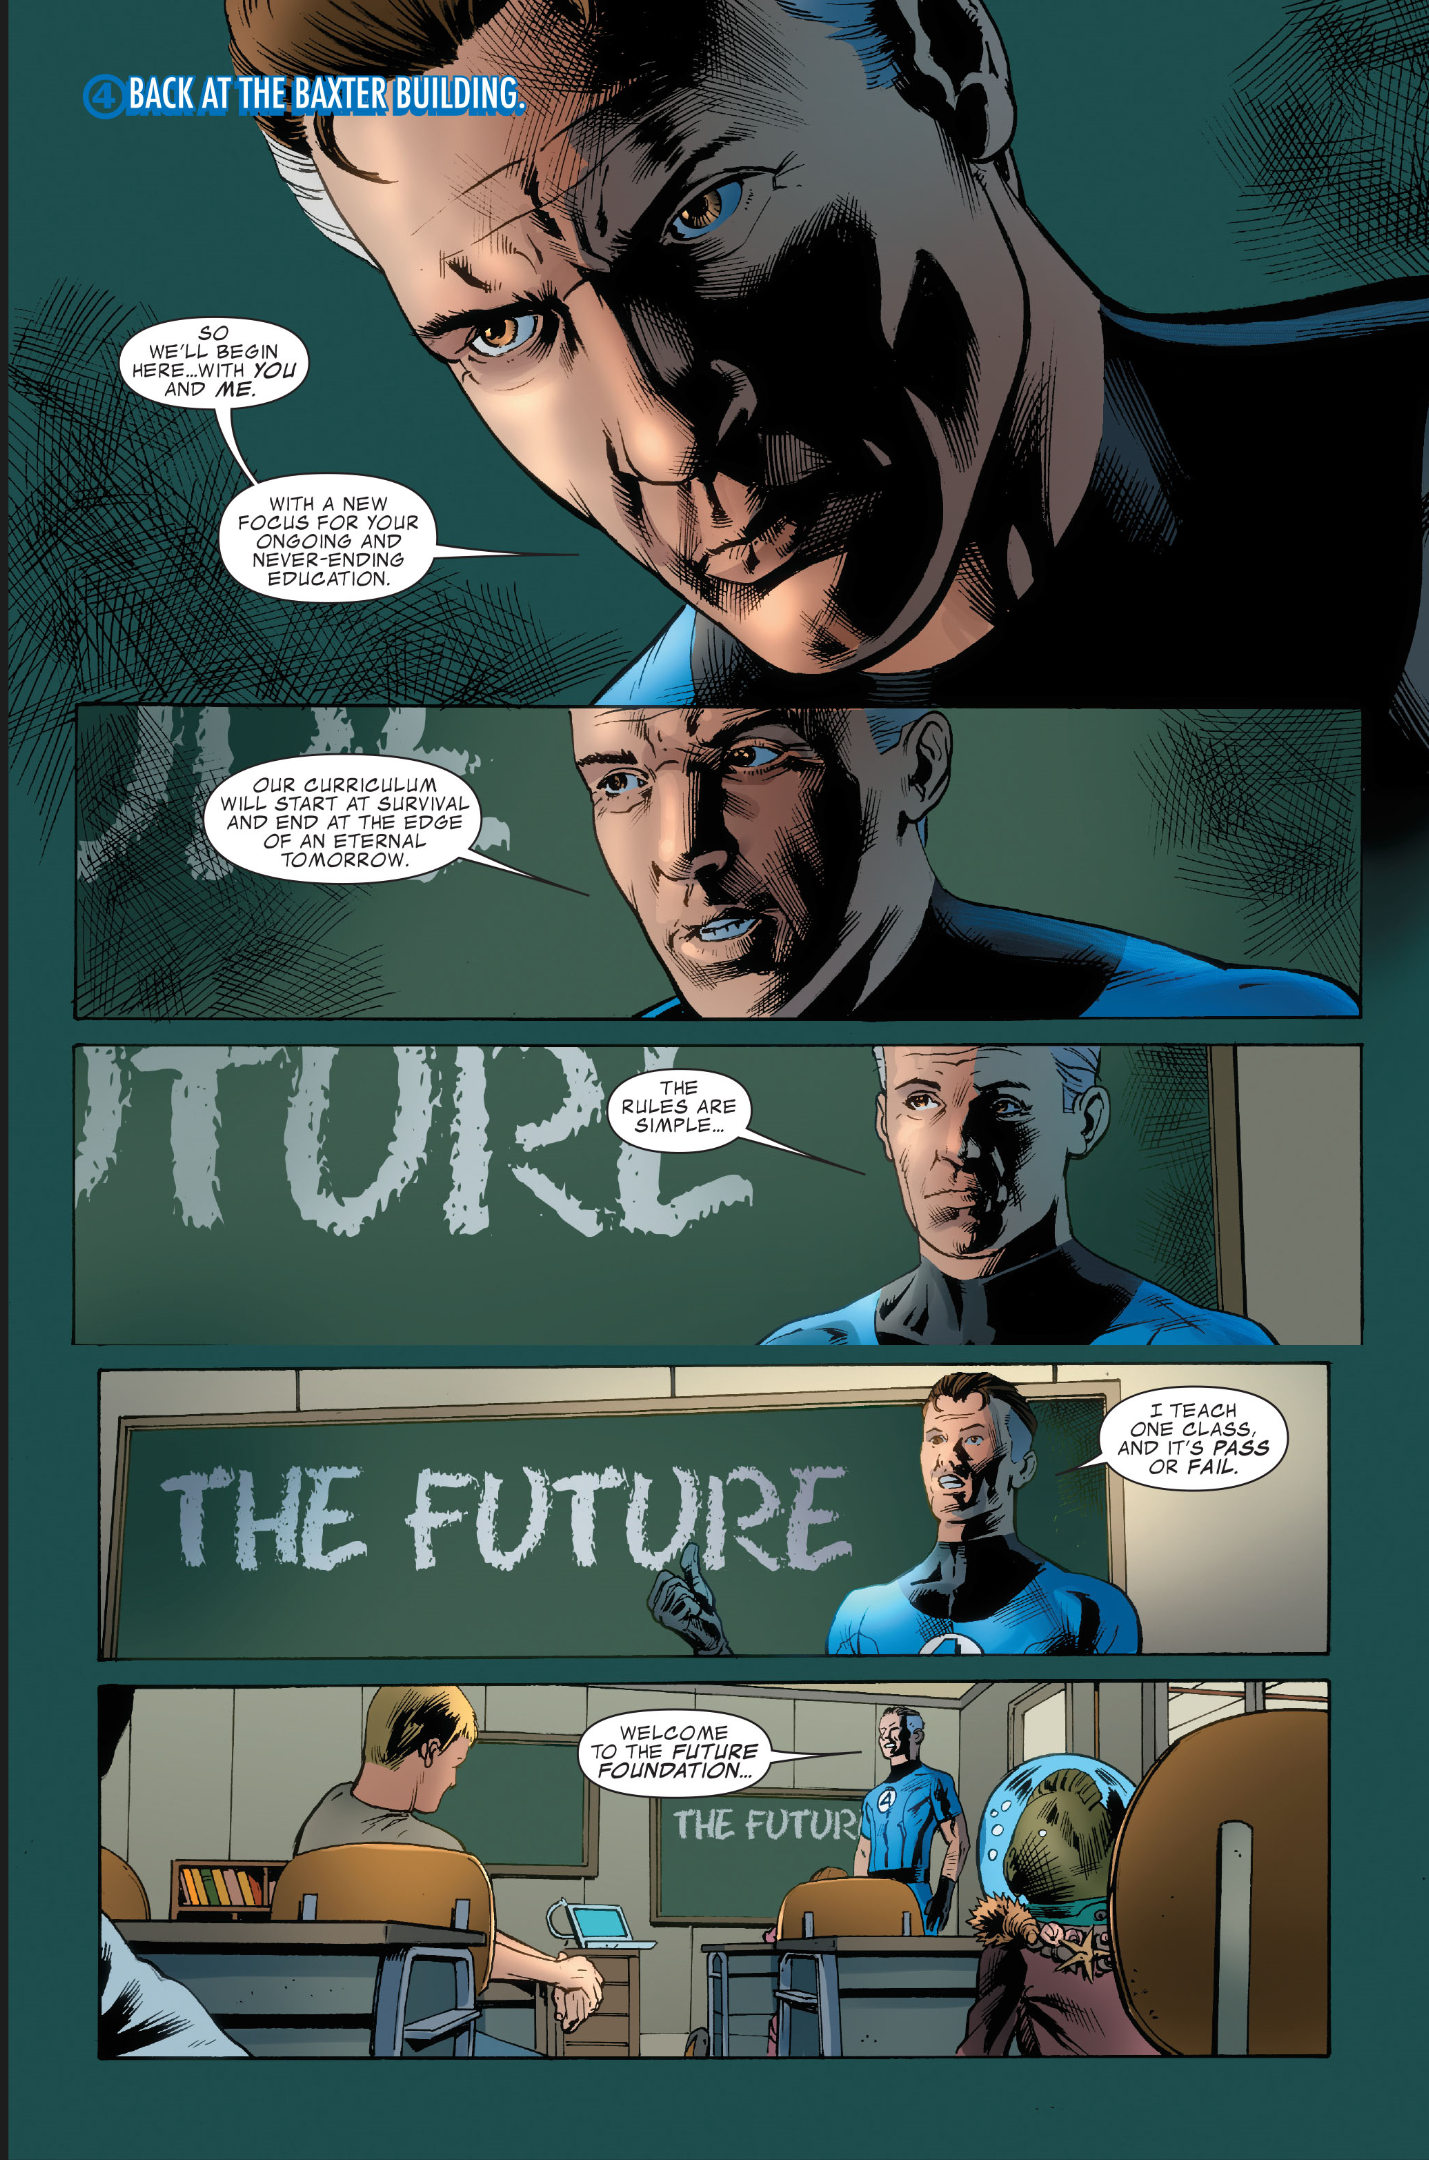 Fantastic Four #579, art by Neil Edwards, Andrew Currie, and Paul Mounts